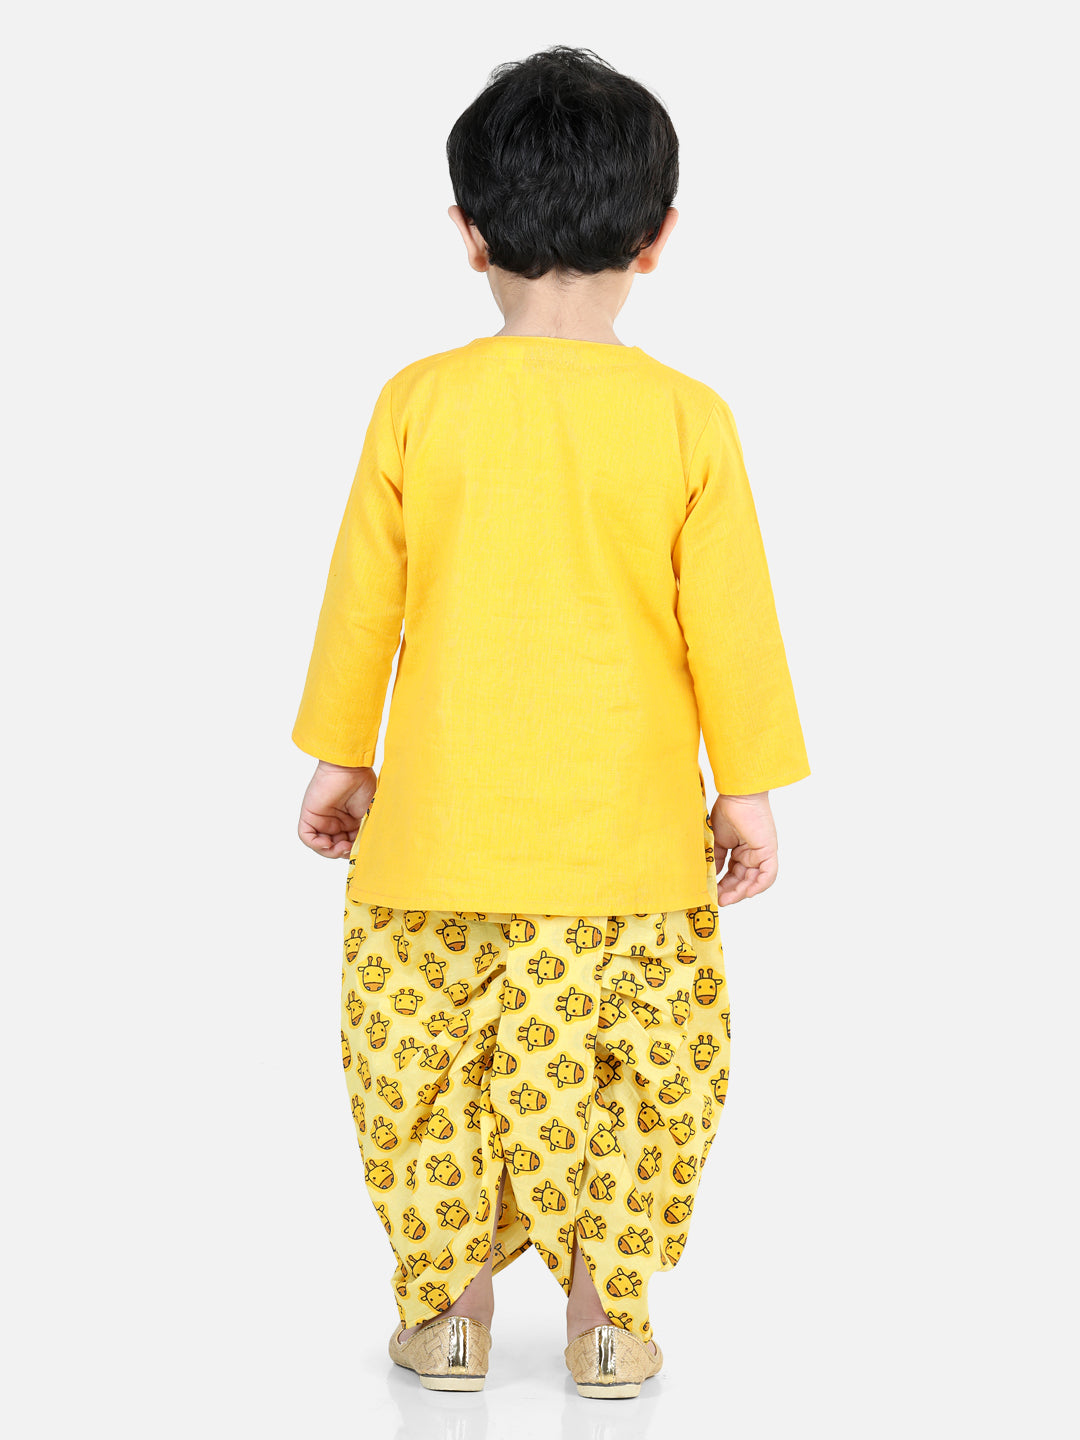 BownBee Sibling Cotton Embroidery Kurta with Printed Dhoti for Boys Printed Top with Dhoti Girls Yellow